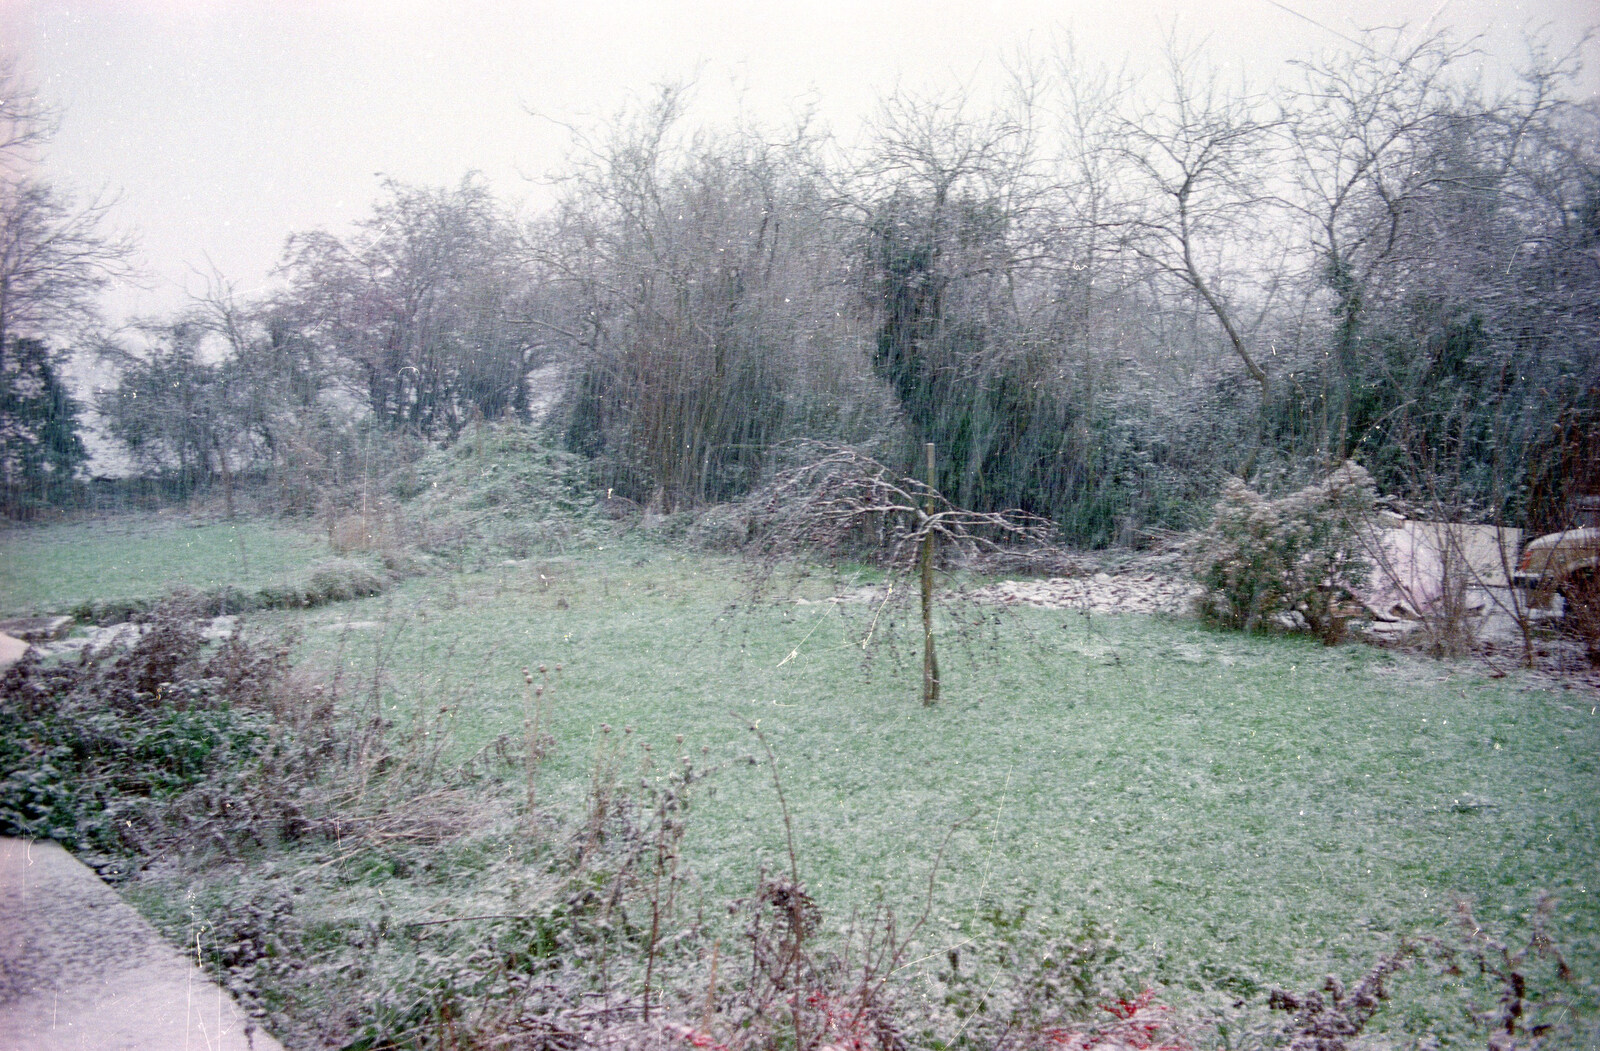 It starts snowing from New Year's Eve in the Swan Inn, Brome, Suffolk - 31st December 1995